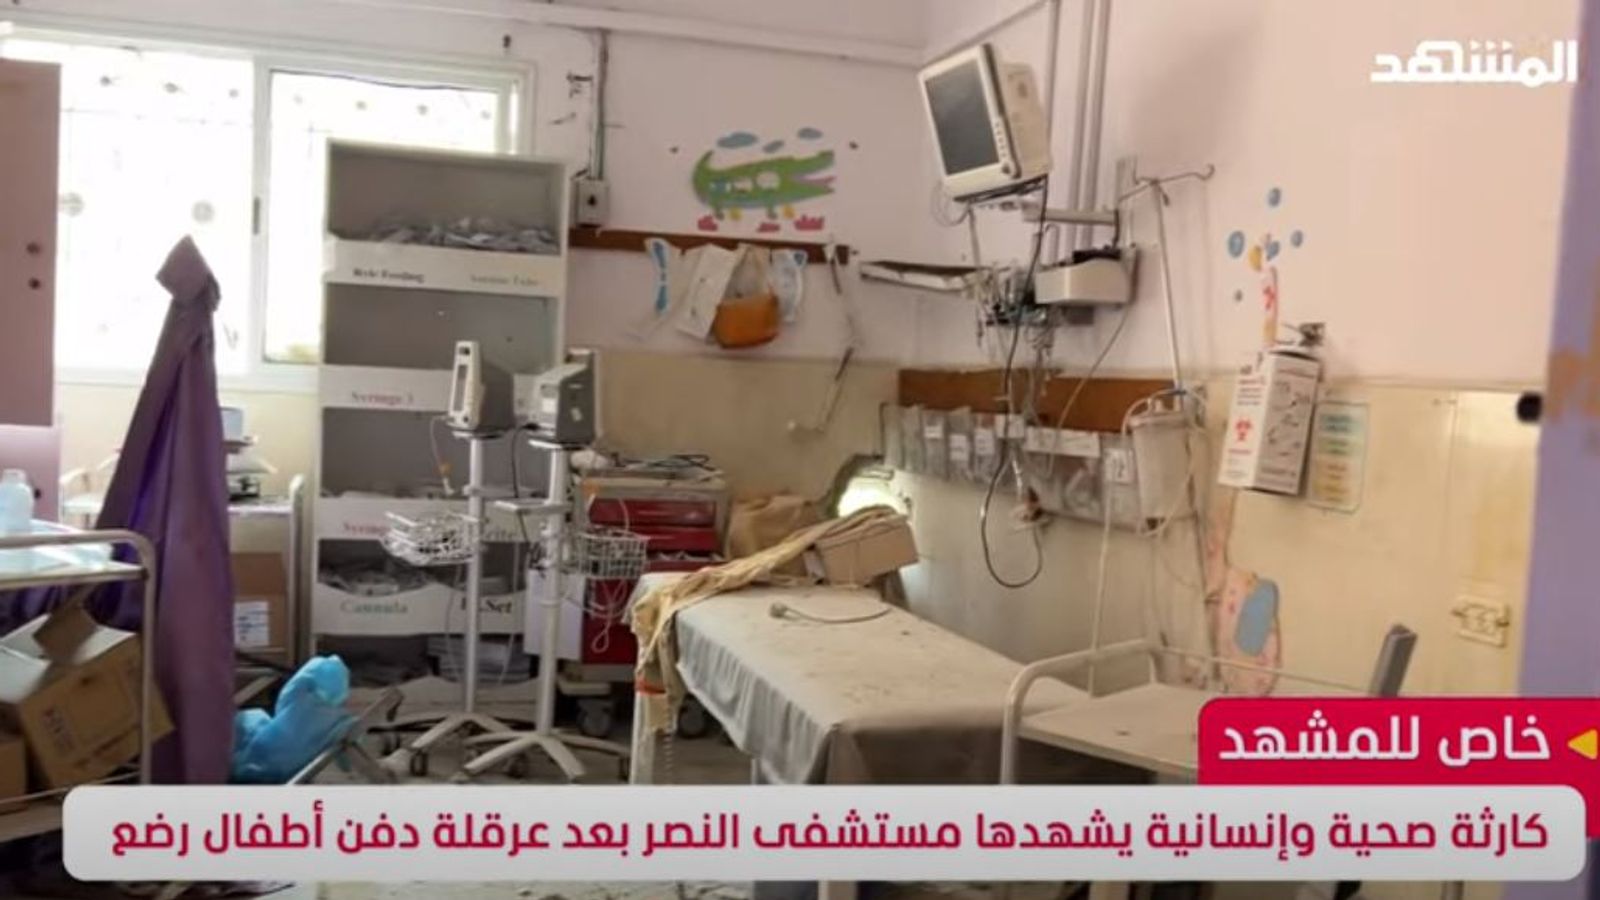 Gaza: Decomposing bodies of babies 'seen in footage' from abandoned children's hospital